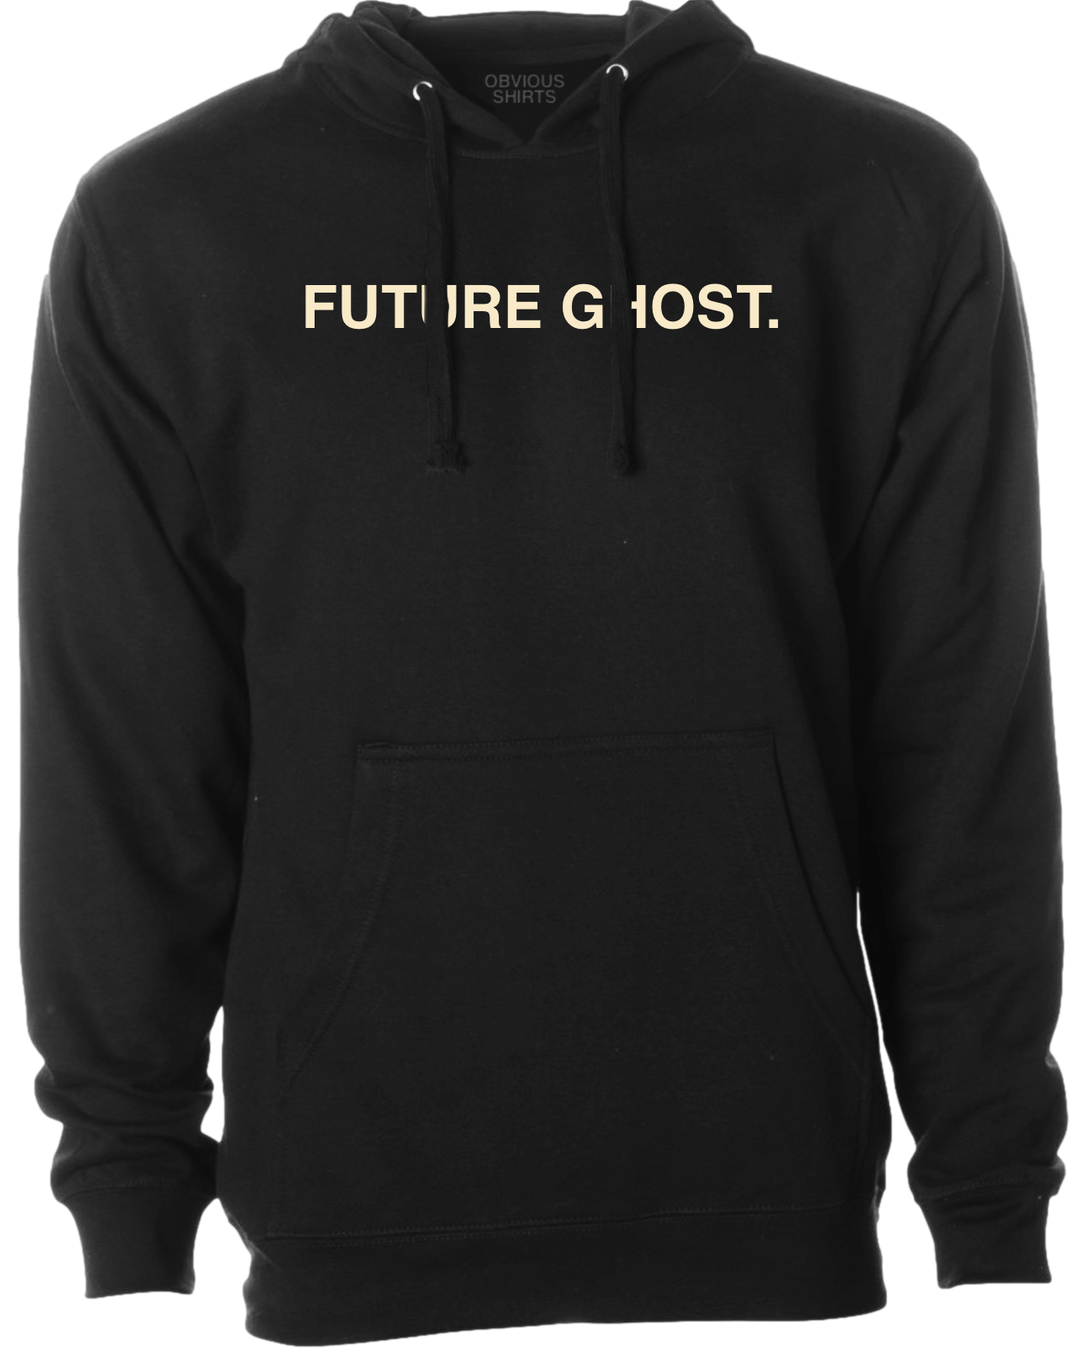 FUTURE GHOST. (GLOW IN THE DARK) HOODED SWEATSHIRT - OBVIOUS SHIRTS